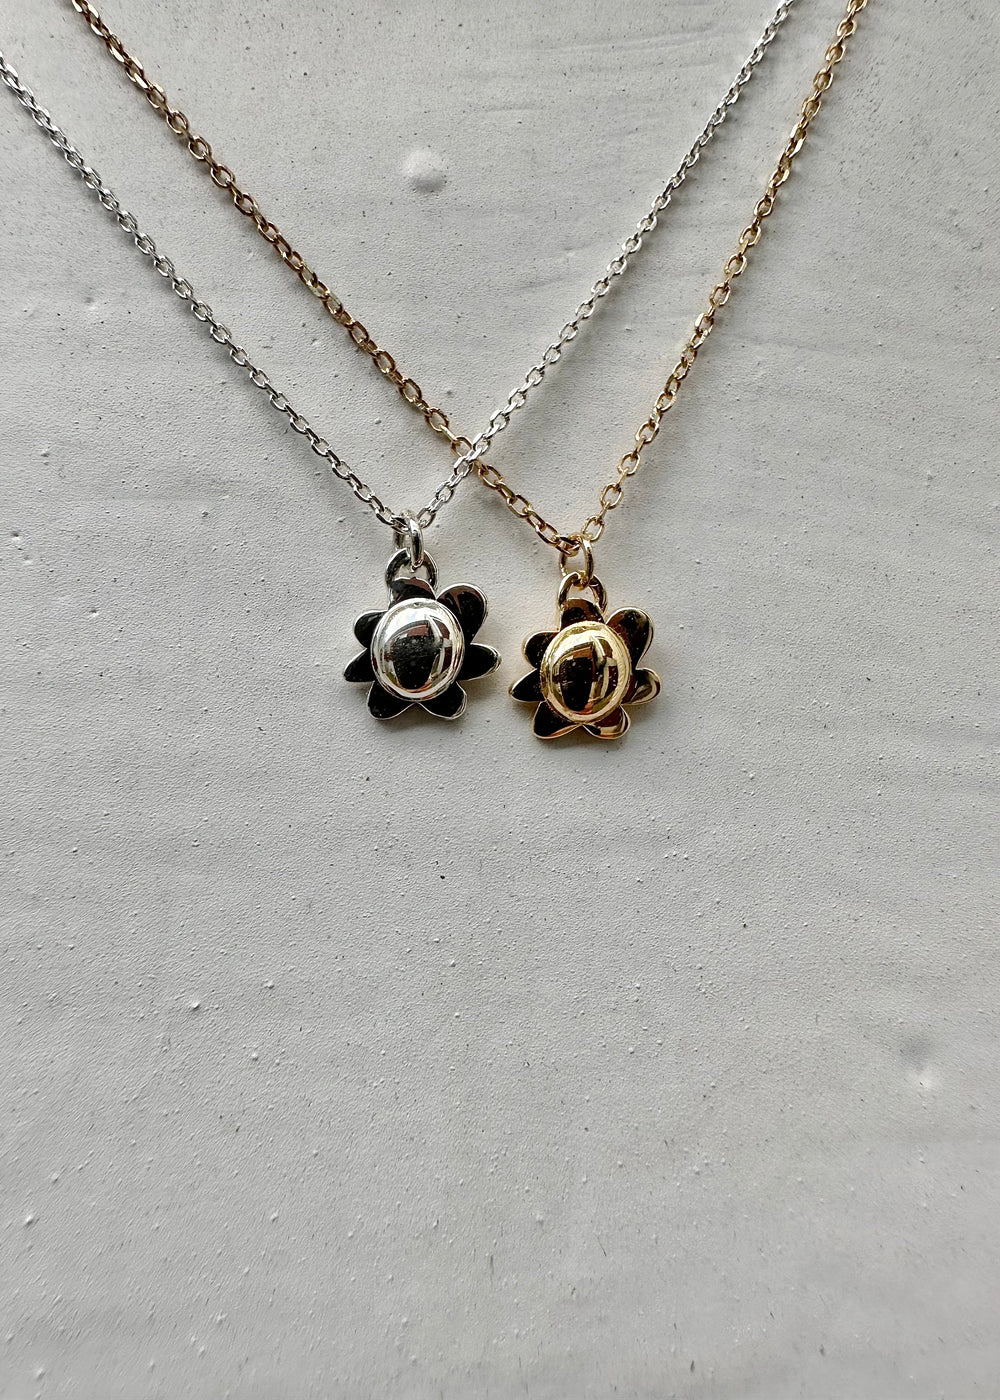 Sunflower Necklace Sterling Silver